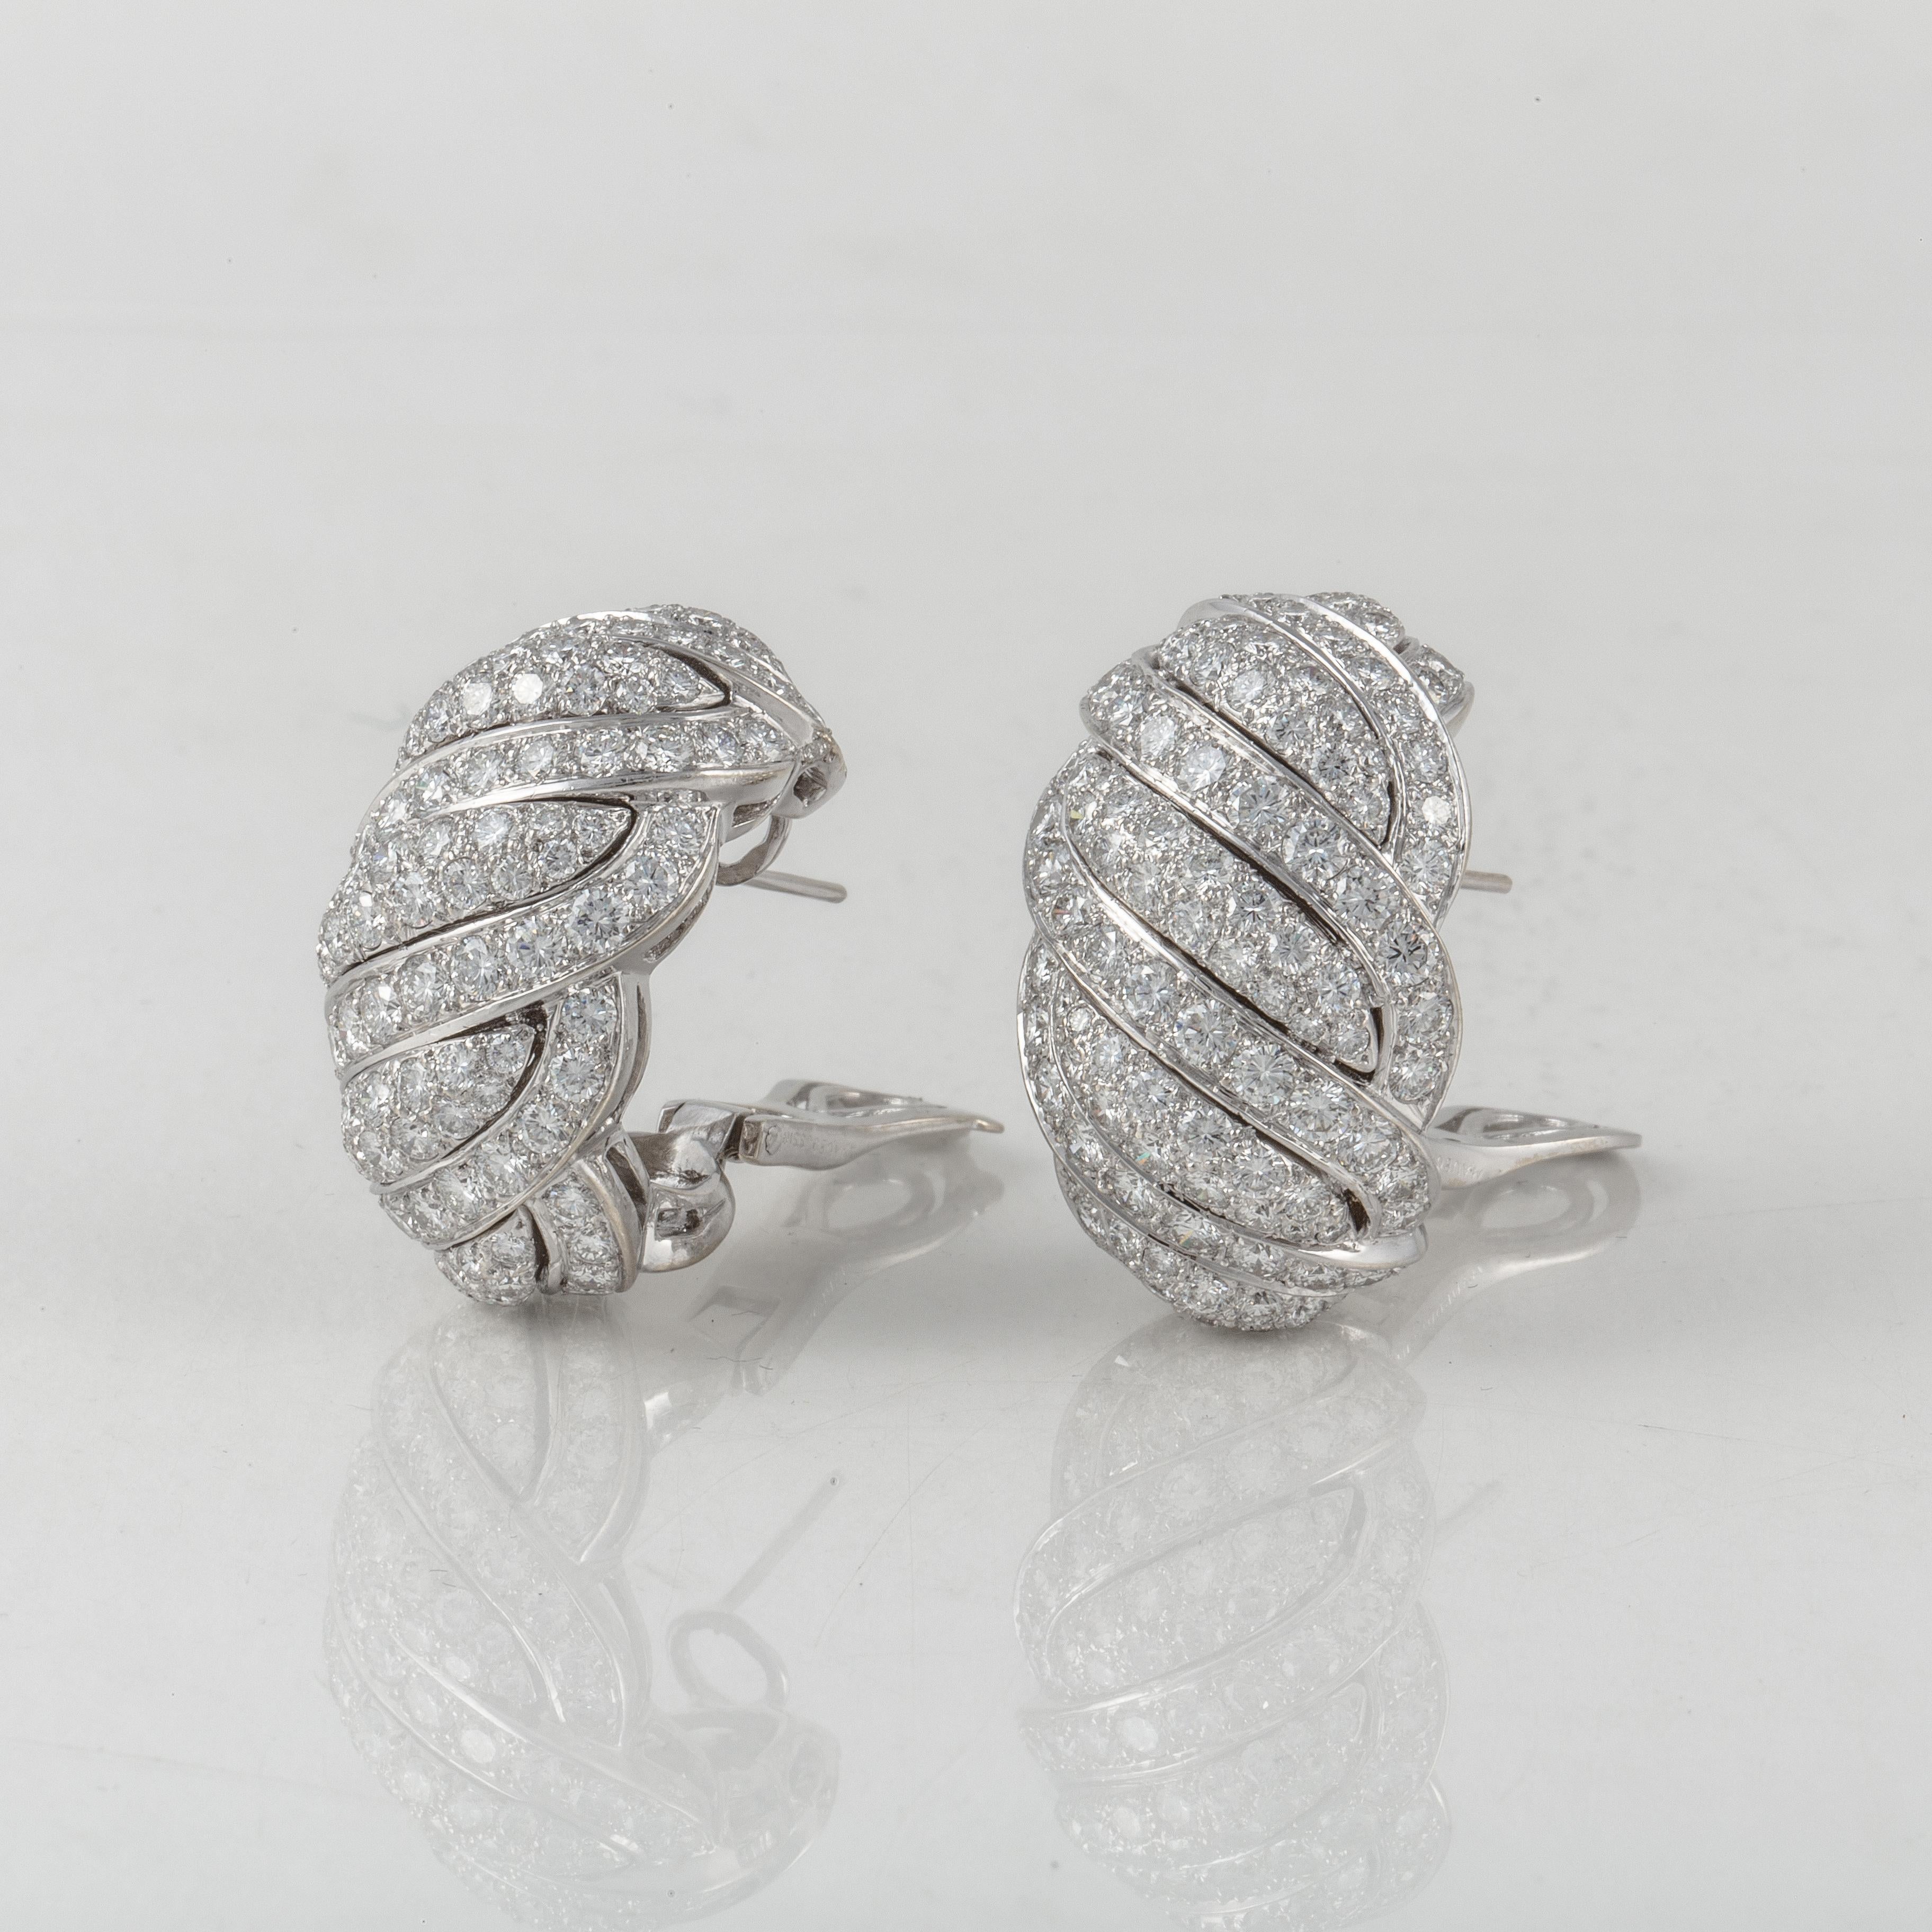 18K white gold diamond earrings by Mauboussin Paris.  They are a half hoop style in a ridged pattern.  There are 246 round diamonds totaling 10 carats, F-G color and VVS1-VS1 clarity.  Measure 1 1/8 inches long, 3/4 inches wide and 3/4 inches deep. 